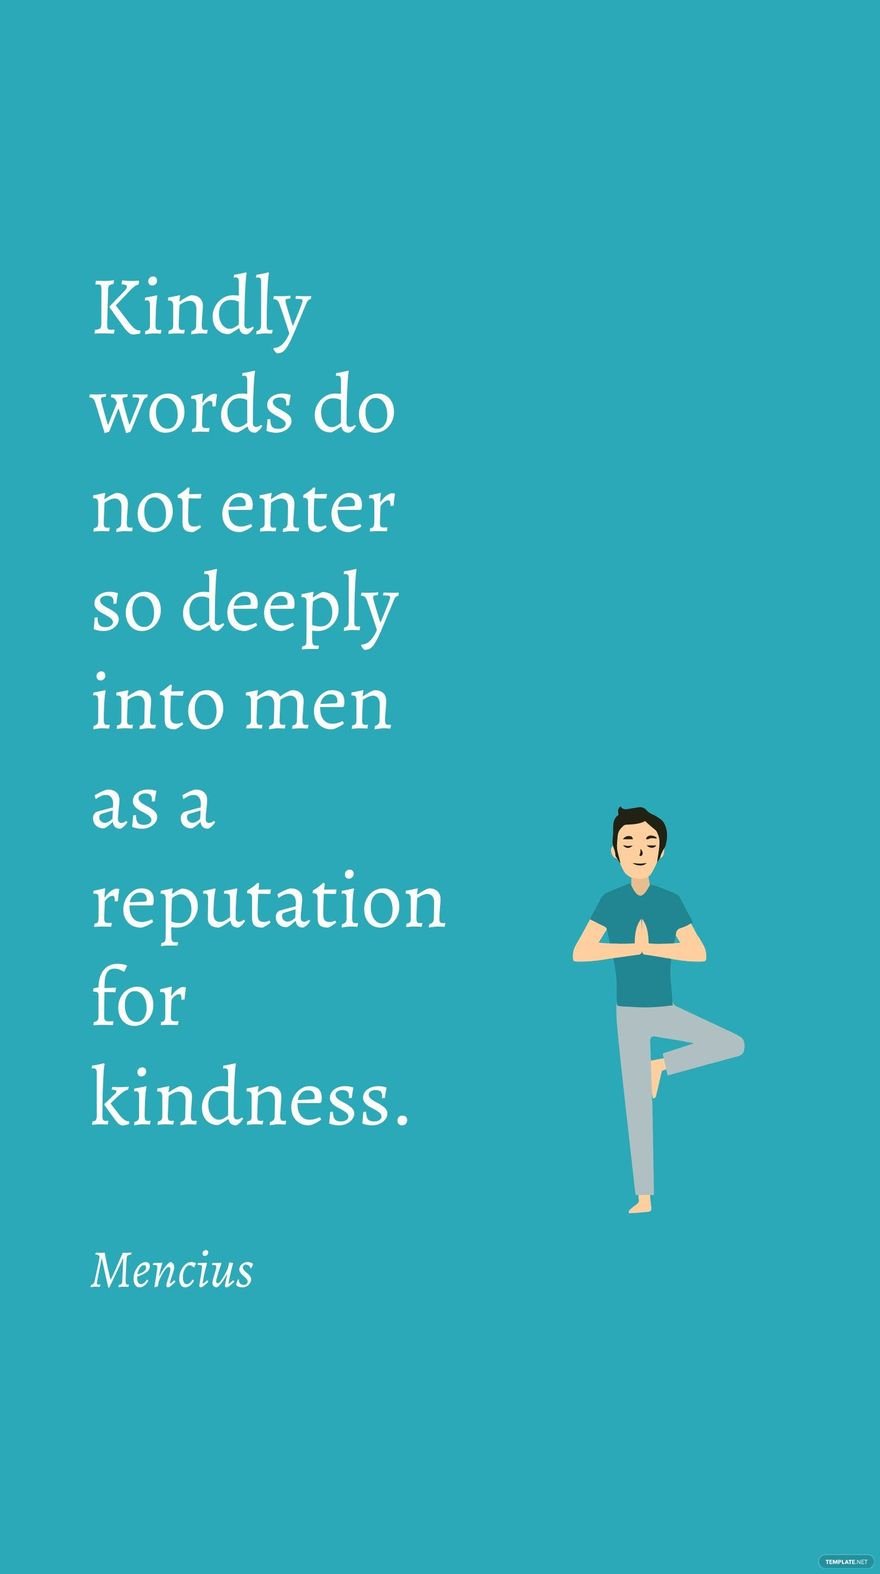 Free Mencius - Kindly words do not enter so deeply into men as a reputation for kindness. in JPG